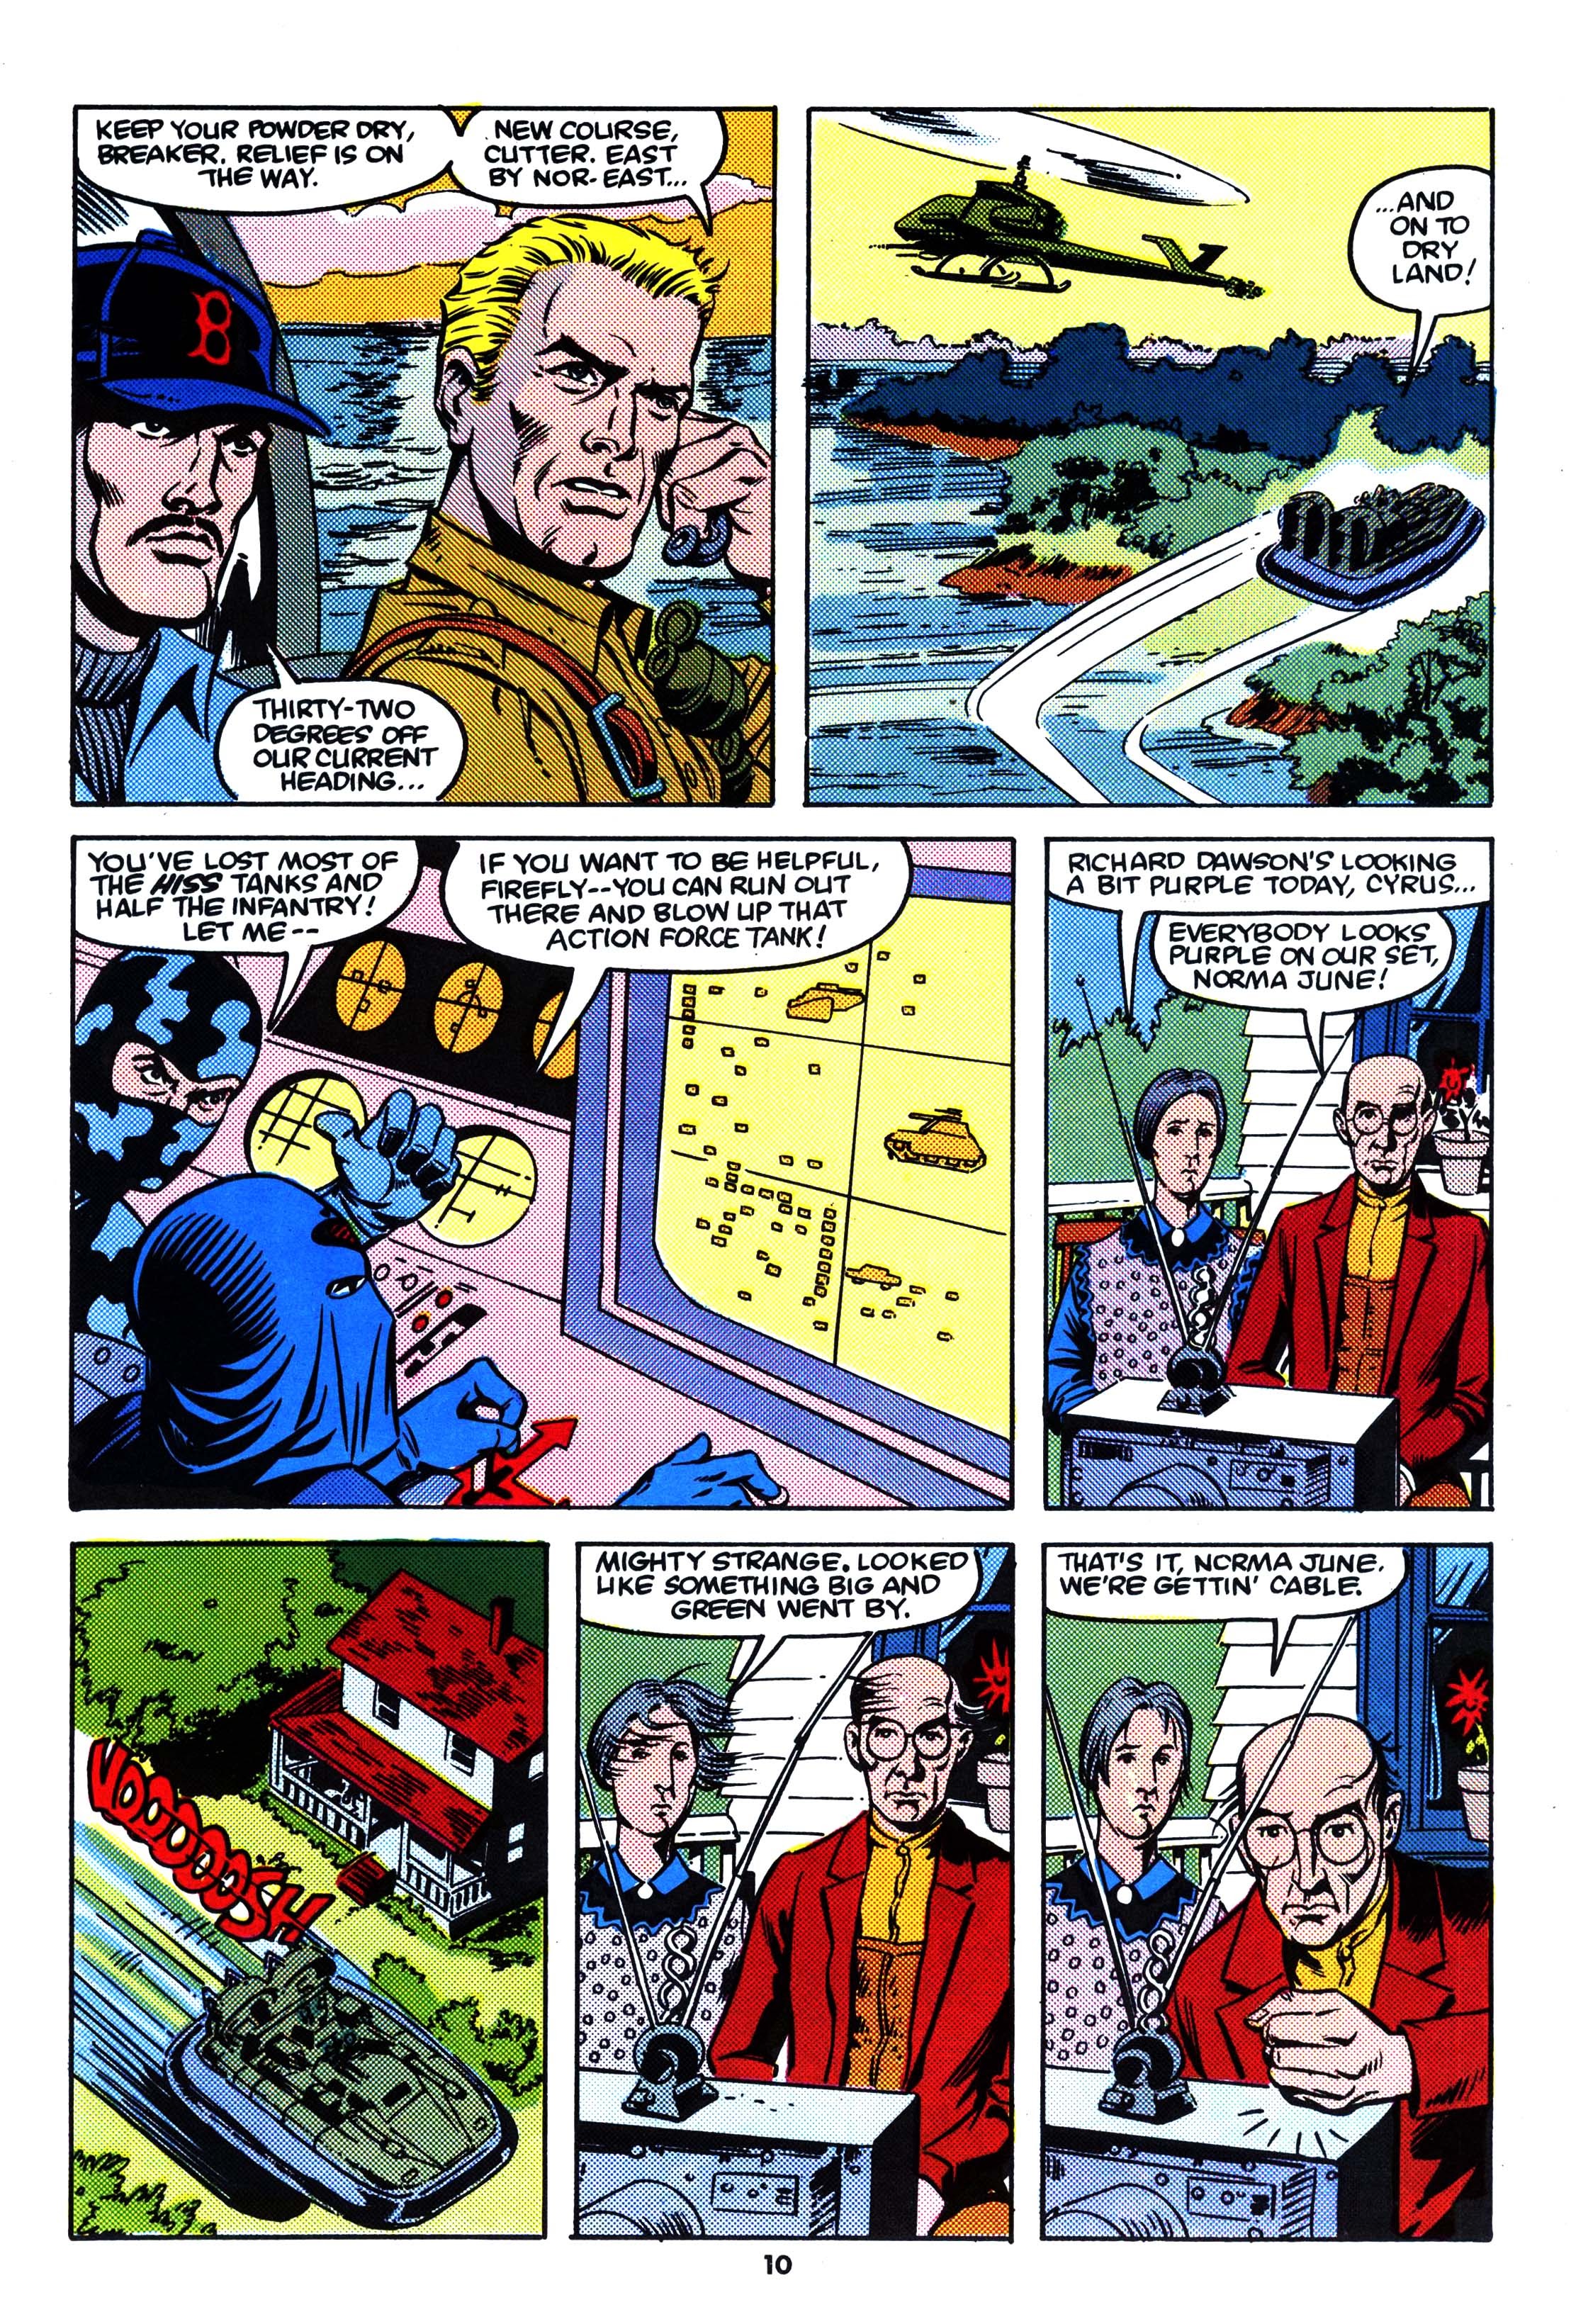 Read online Action Force comic -  Issue #16 - 10